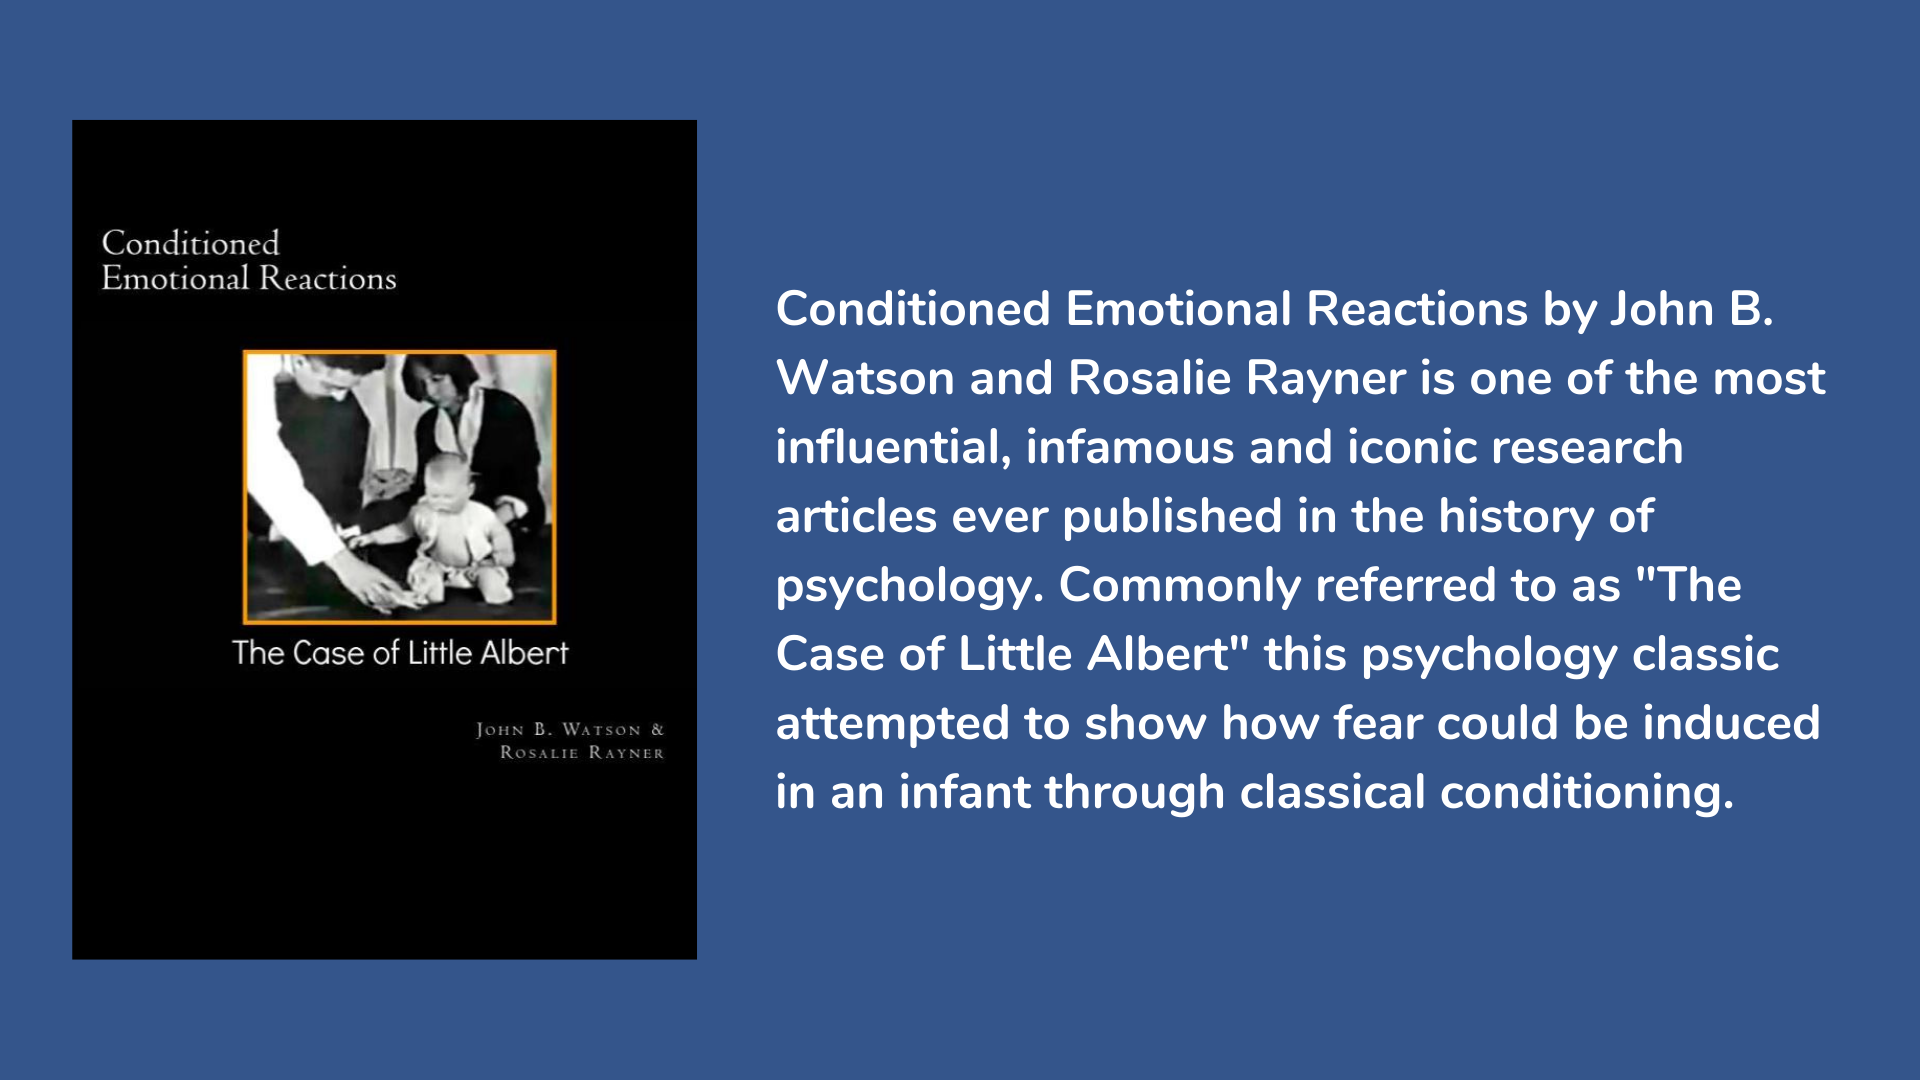 Conditioned Emotional Reactions (The Case of Little Albert) by John B. Watson and Rosalie Rayner